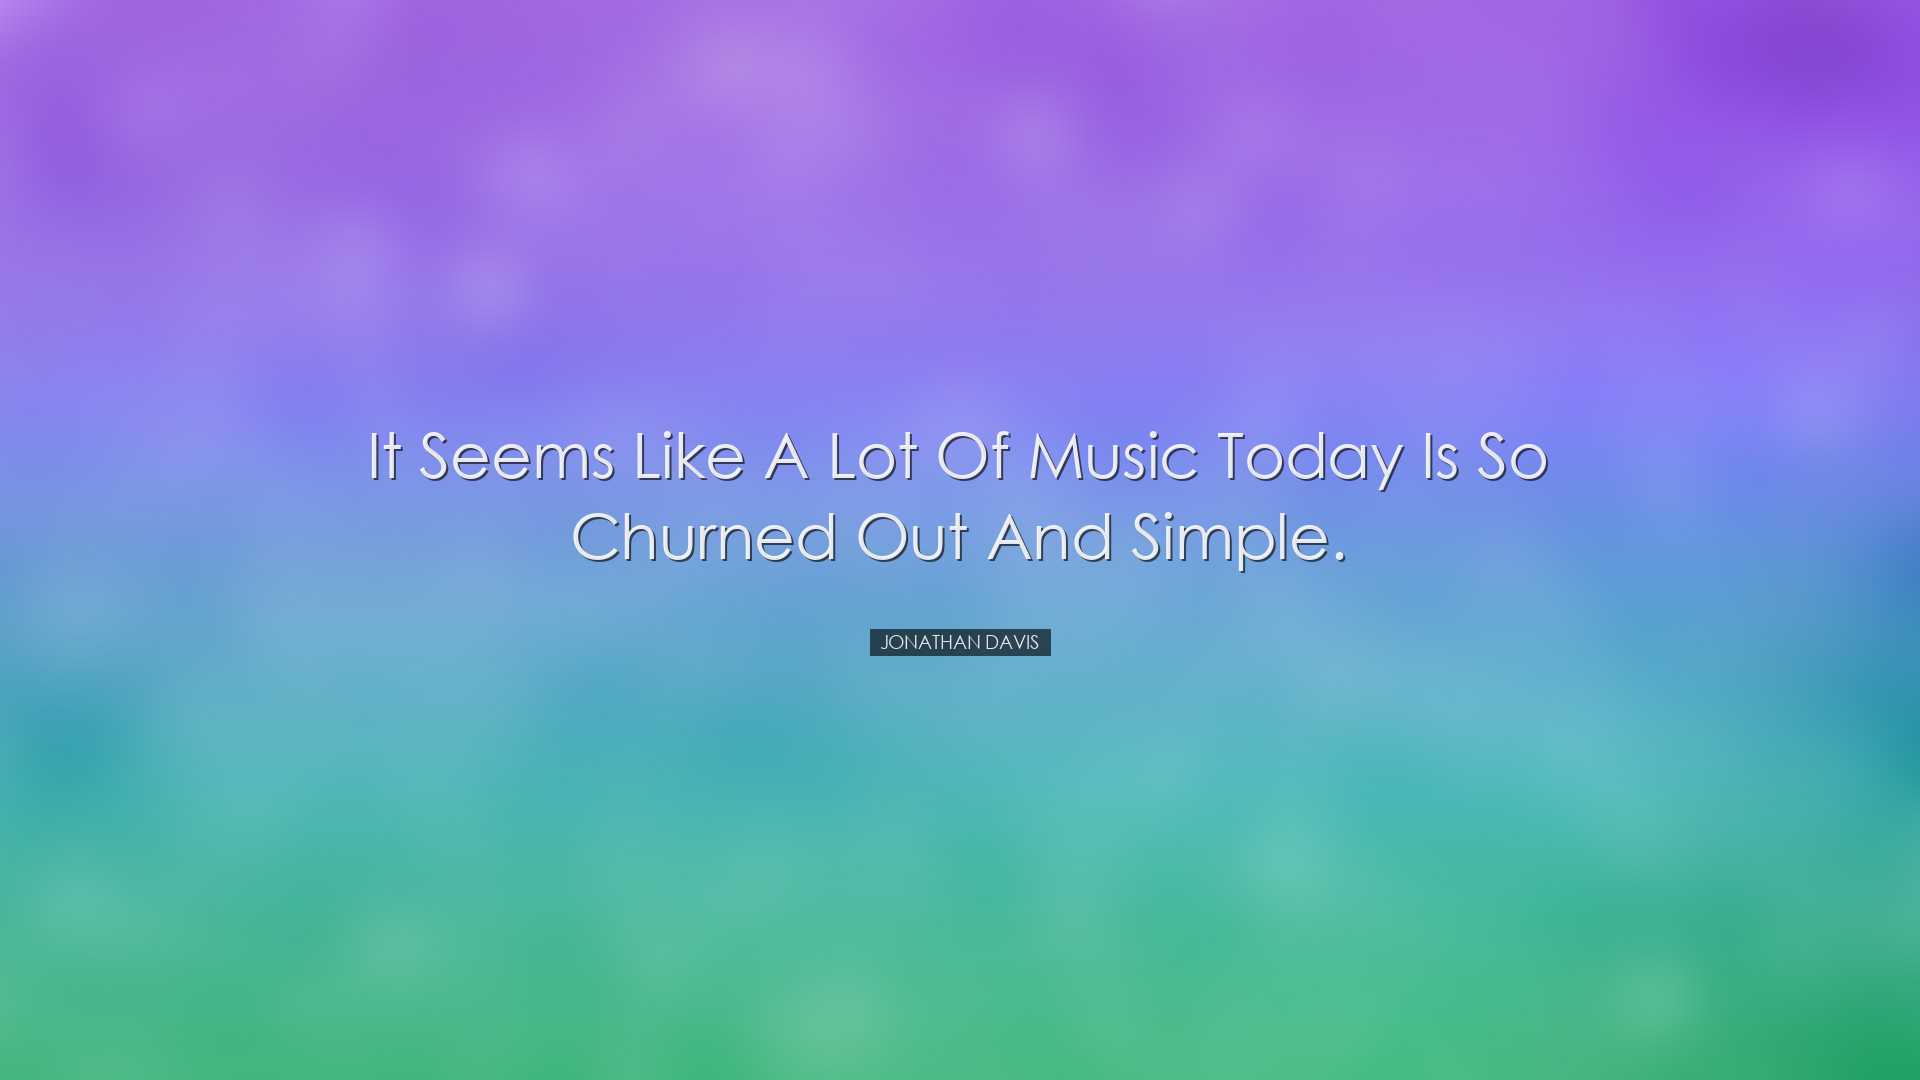 It seems like a lot of music today is so churned out and simple. -